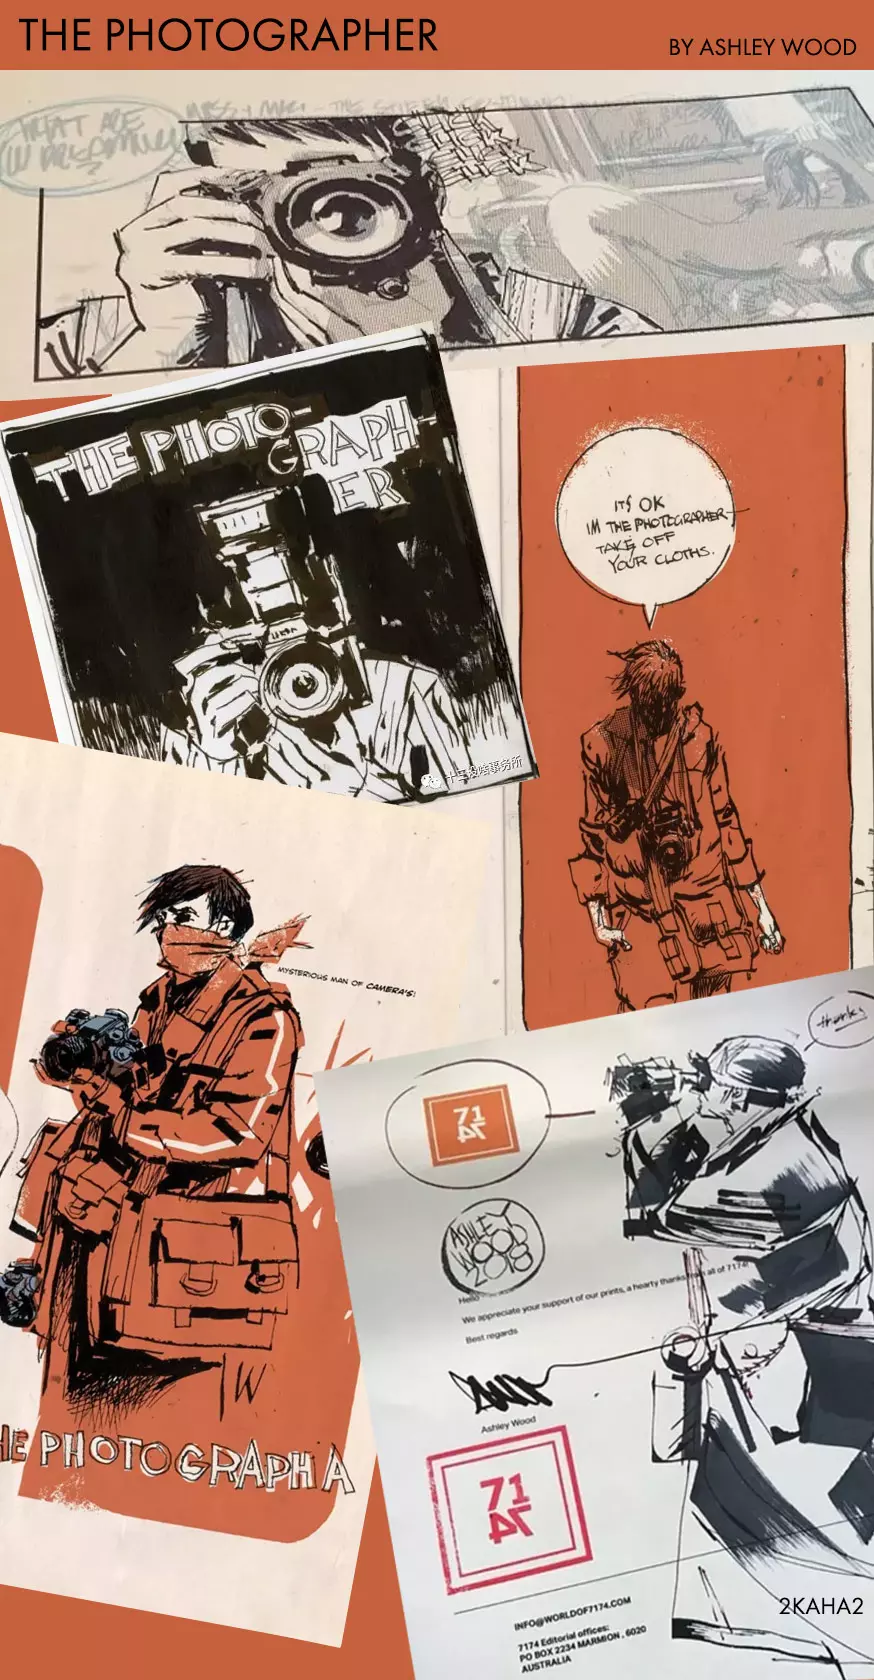 The Photographer by Ashley Wood